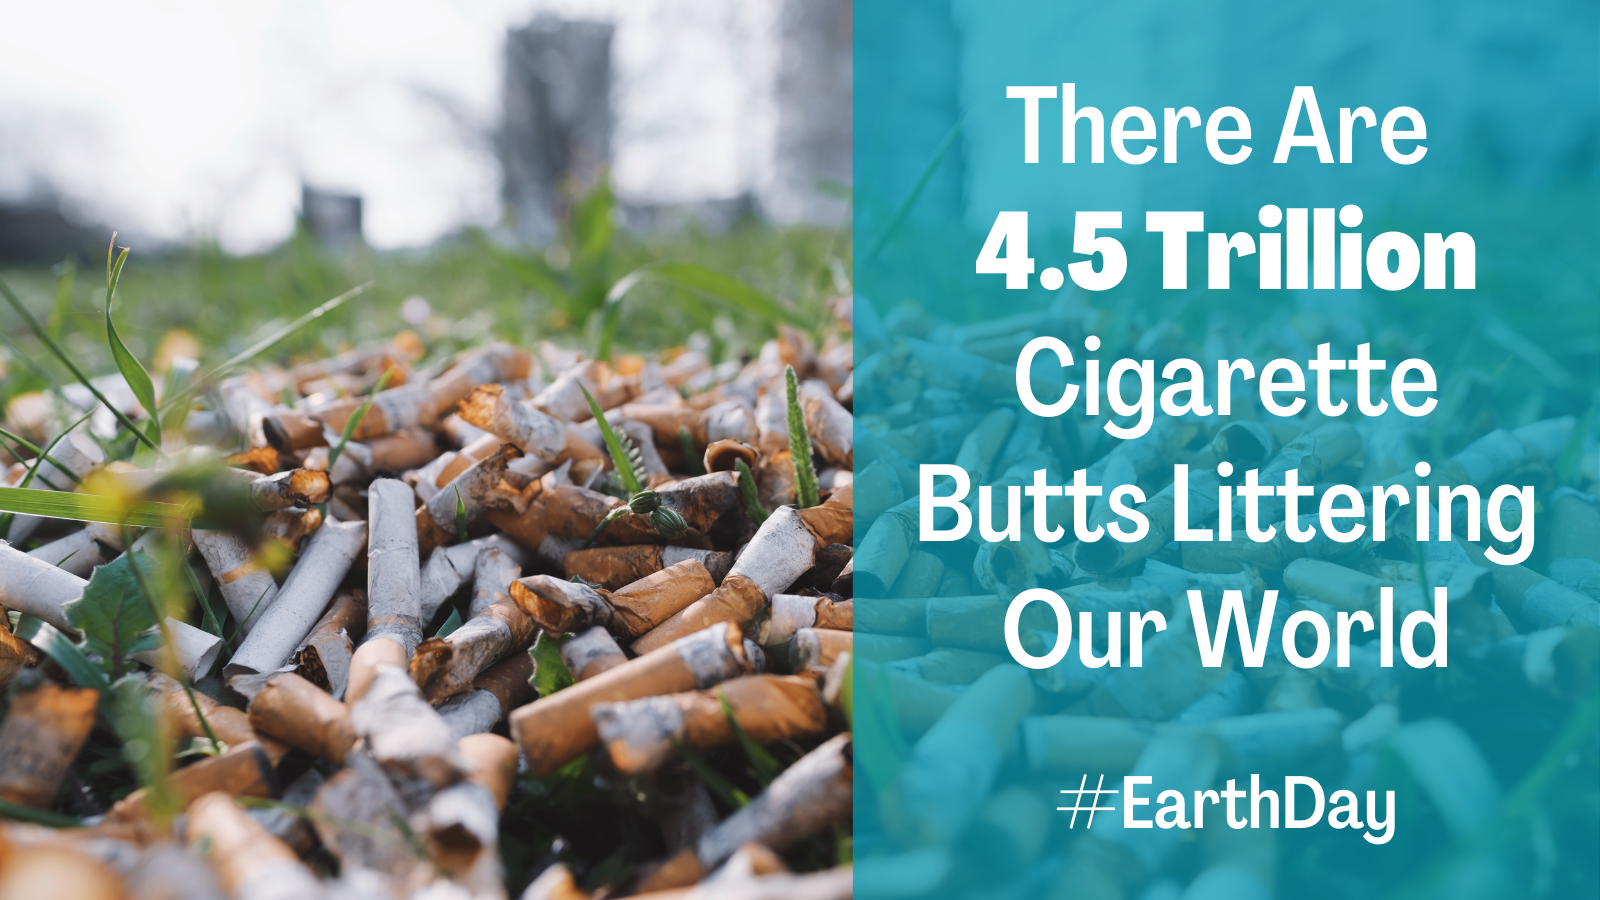 There are 4.5 trillion cigarette butts littering our world #EarthDay